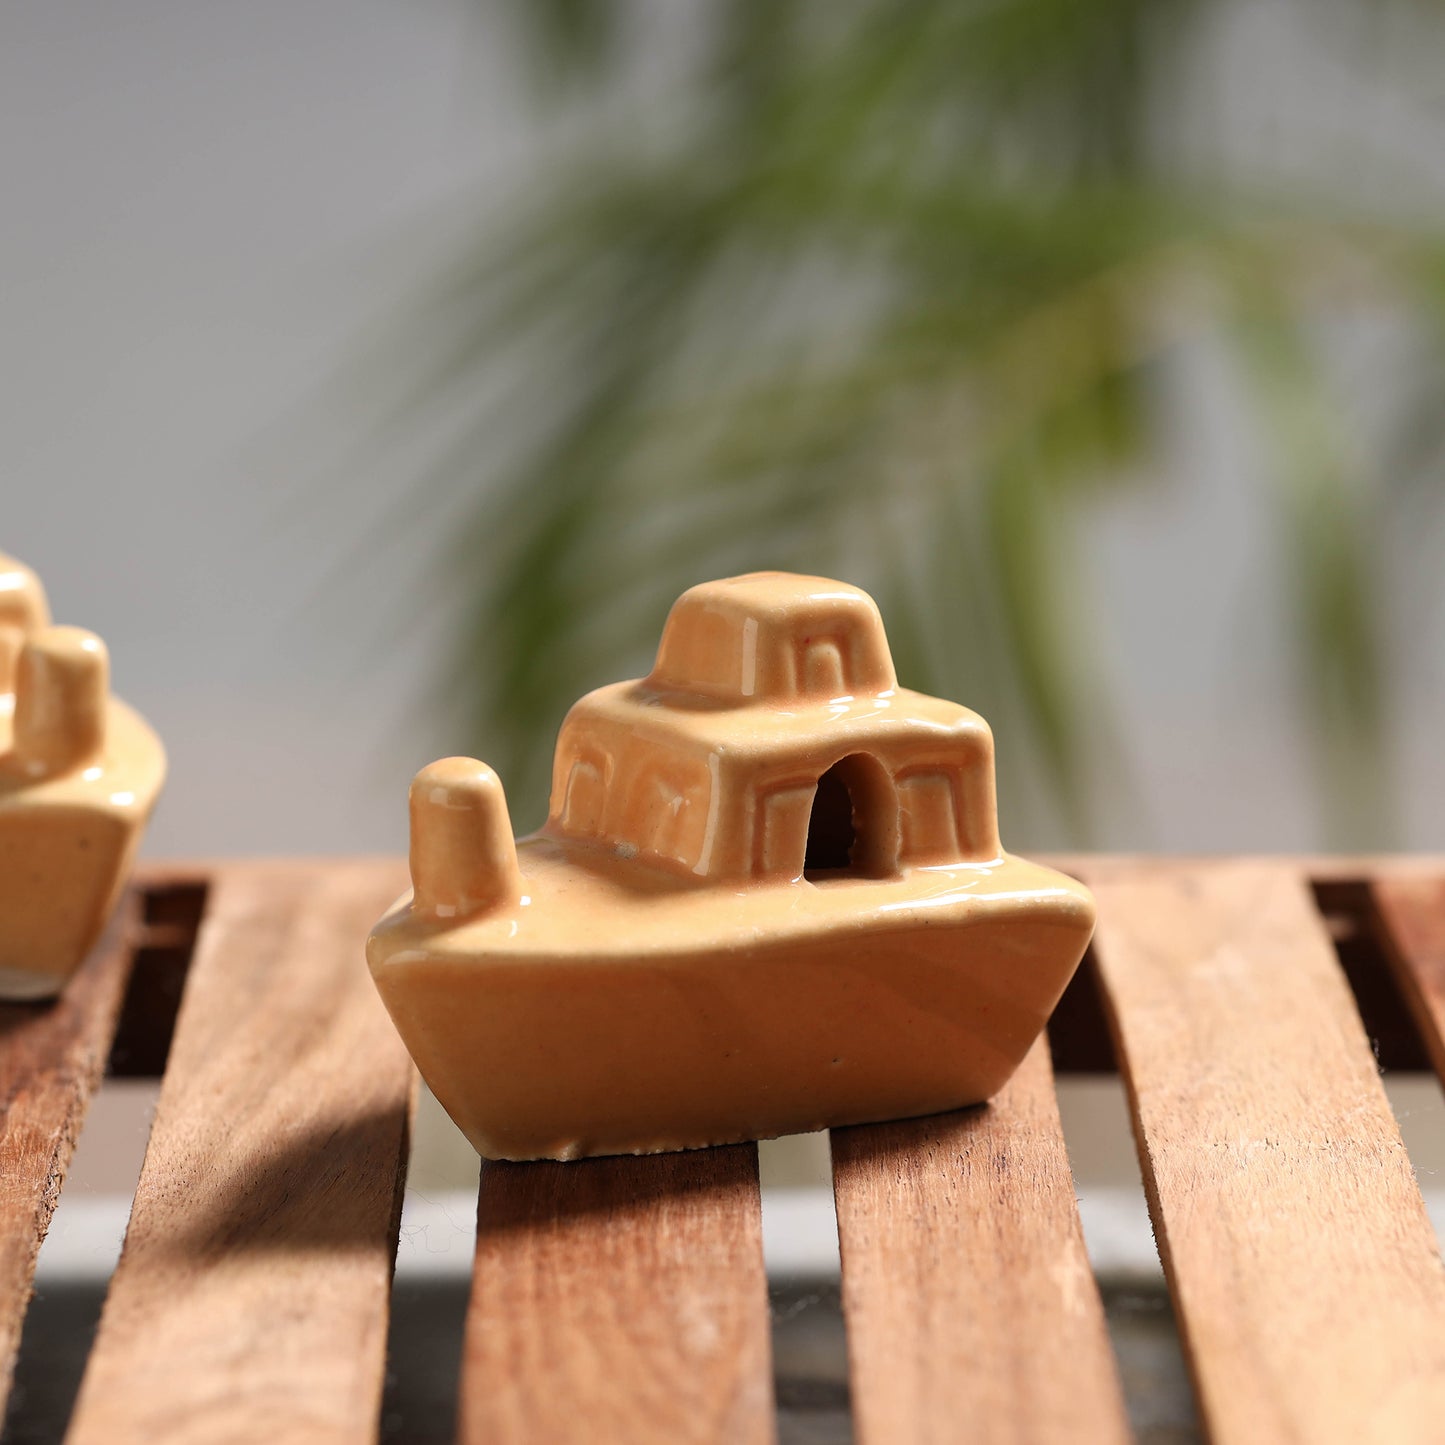 Boat - Handcrafted Ceramic Toys (Set of 2)